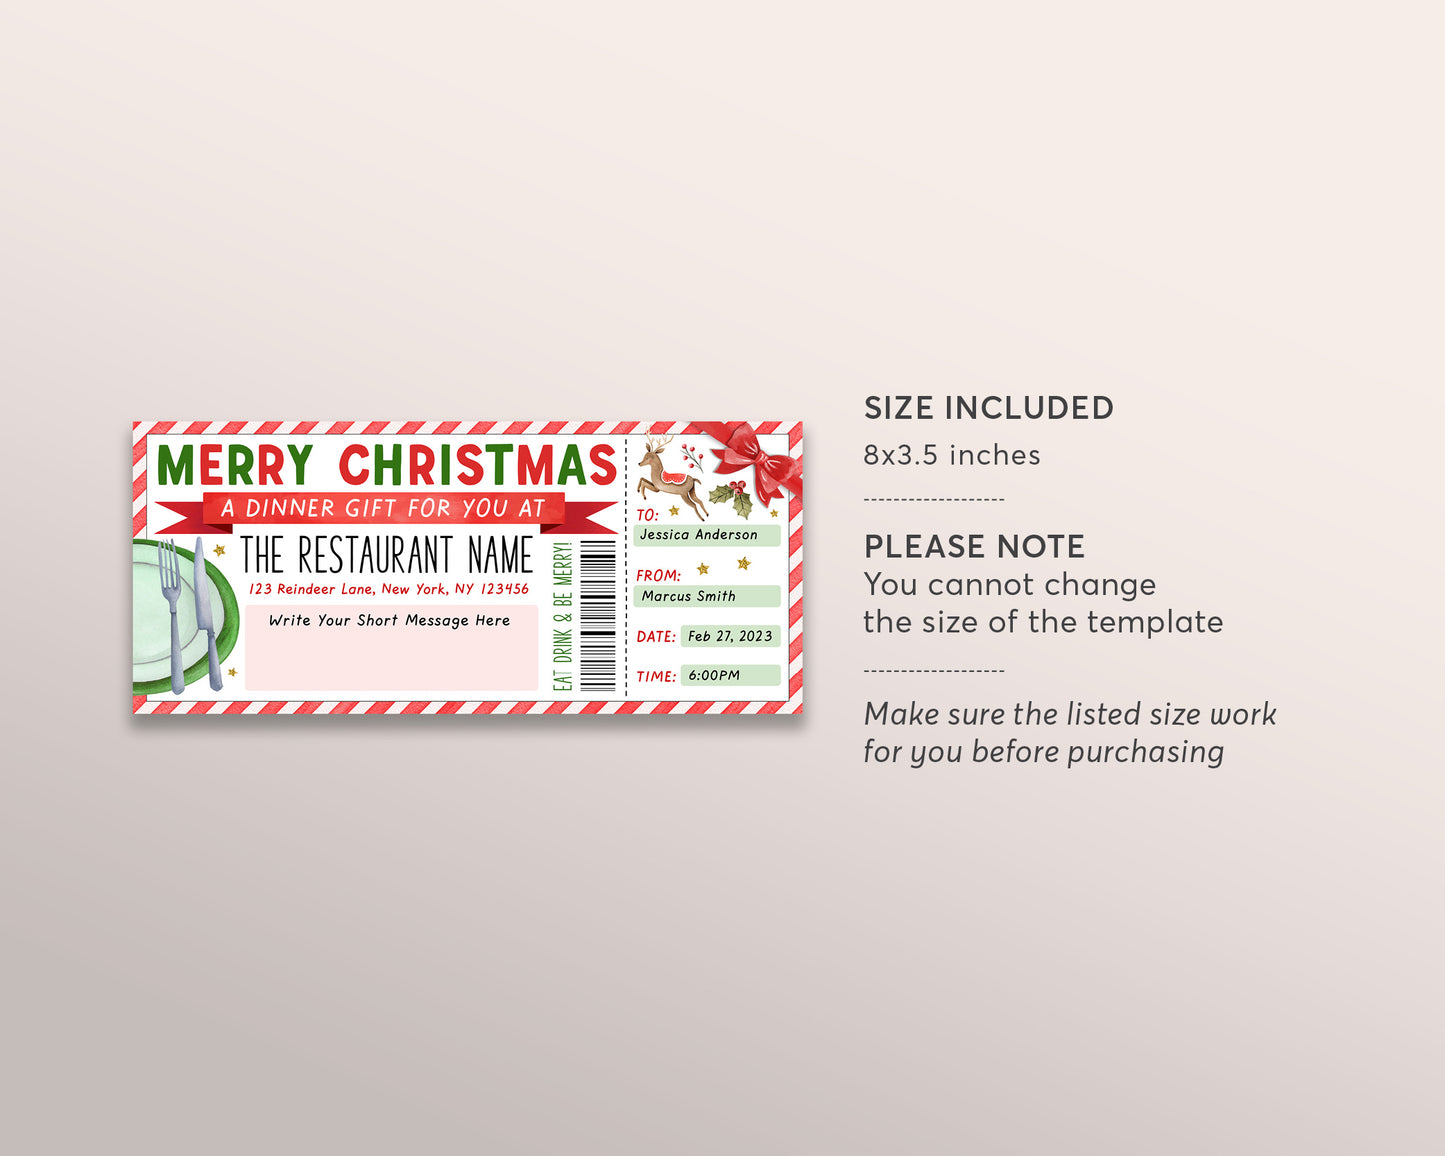 Christmas Restaurant Gift Voucher Editable Template, Xmas Holiday Dinner Date Gift Certificate Invite Printable Winter Dining Night Out Gift